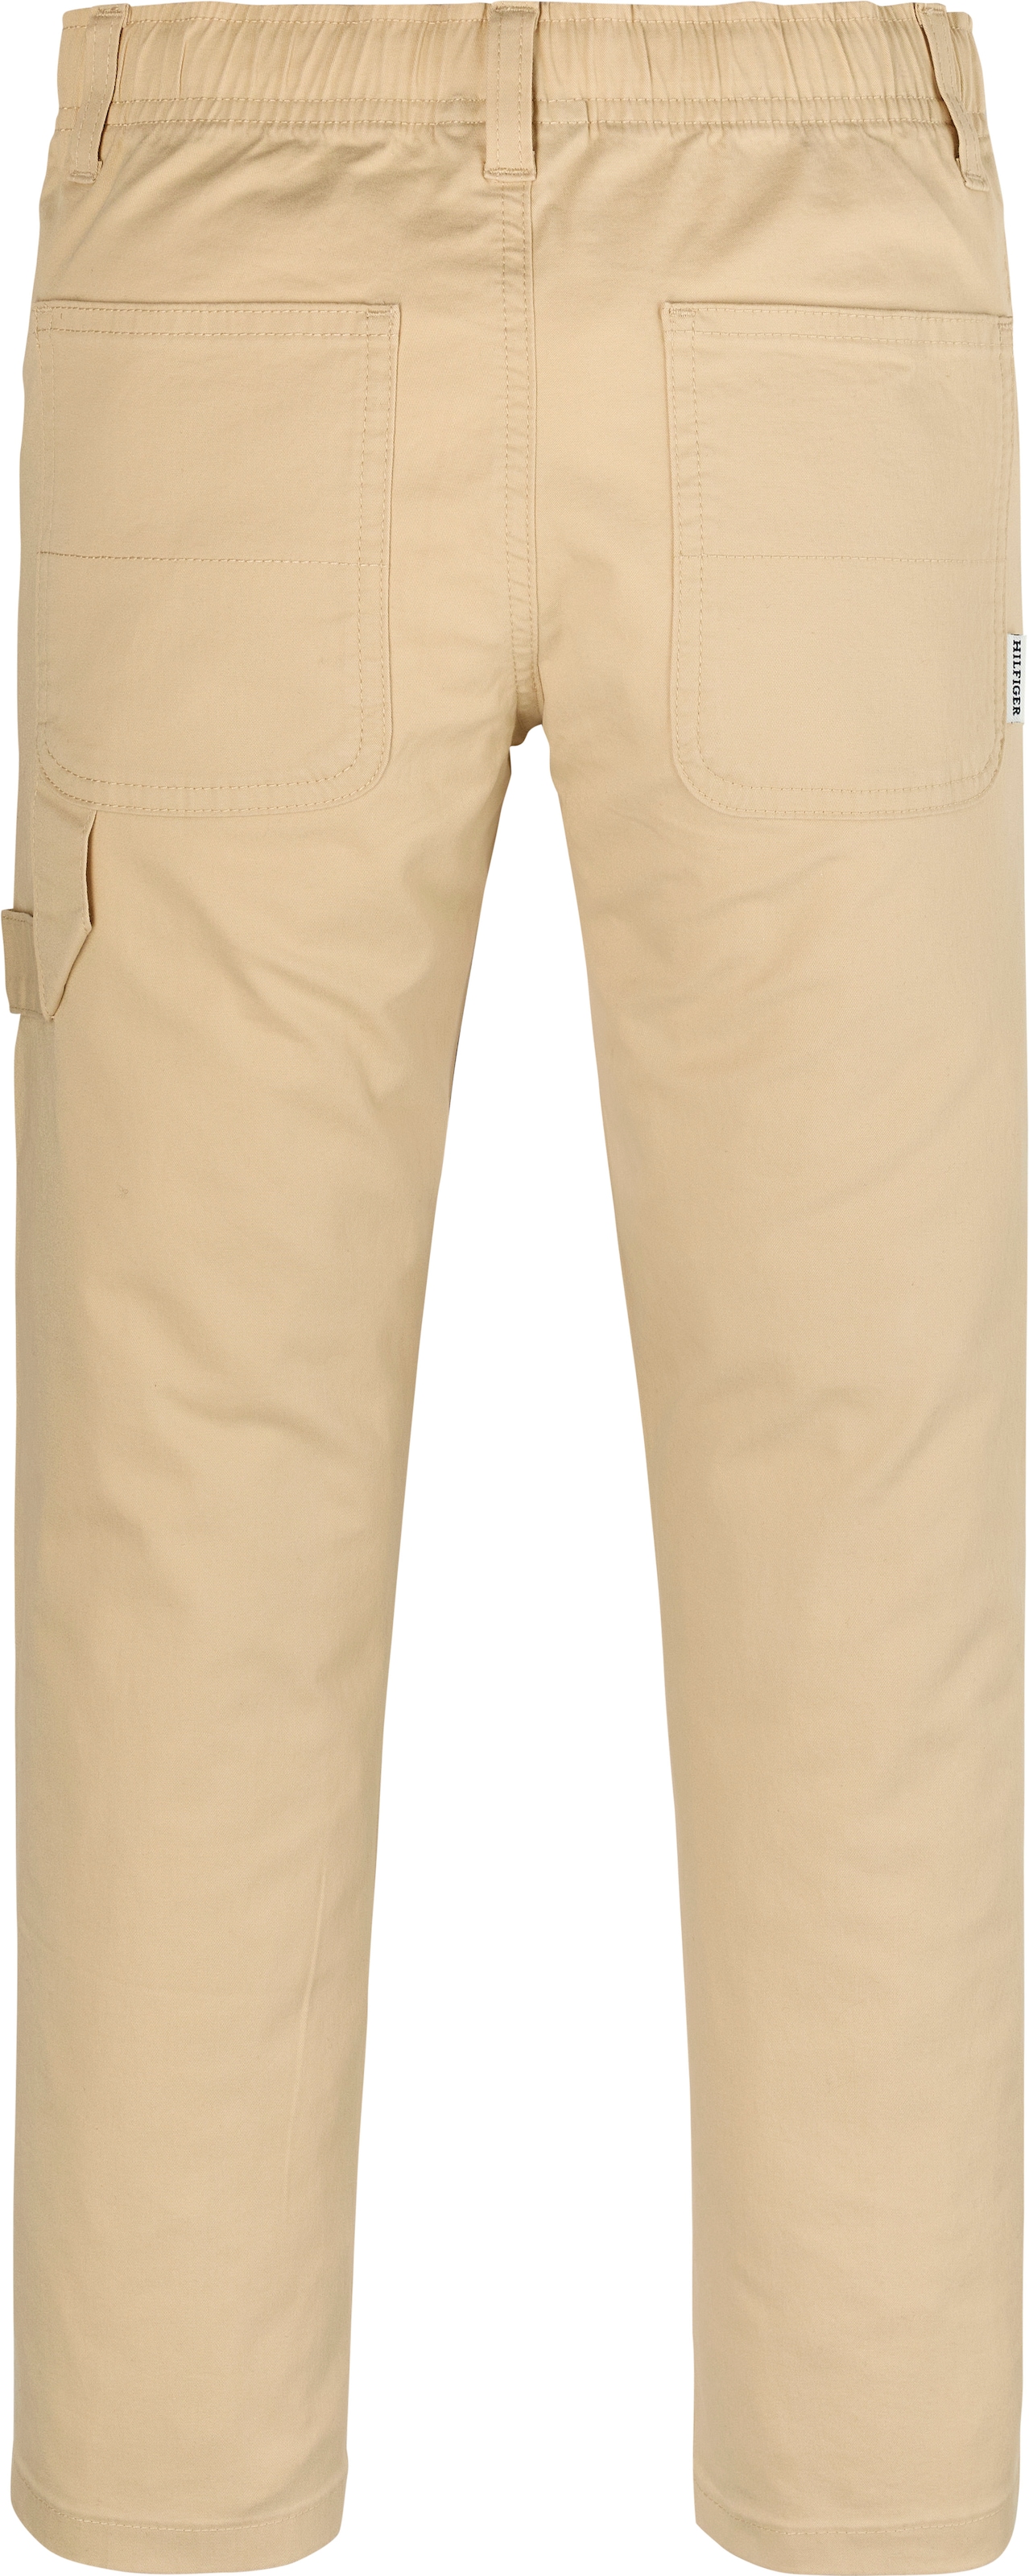 Tommy Hilfiger Webhose »SKATER PULL ON WOVEN PANTS«, mit Logostickerei